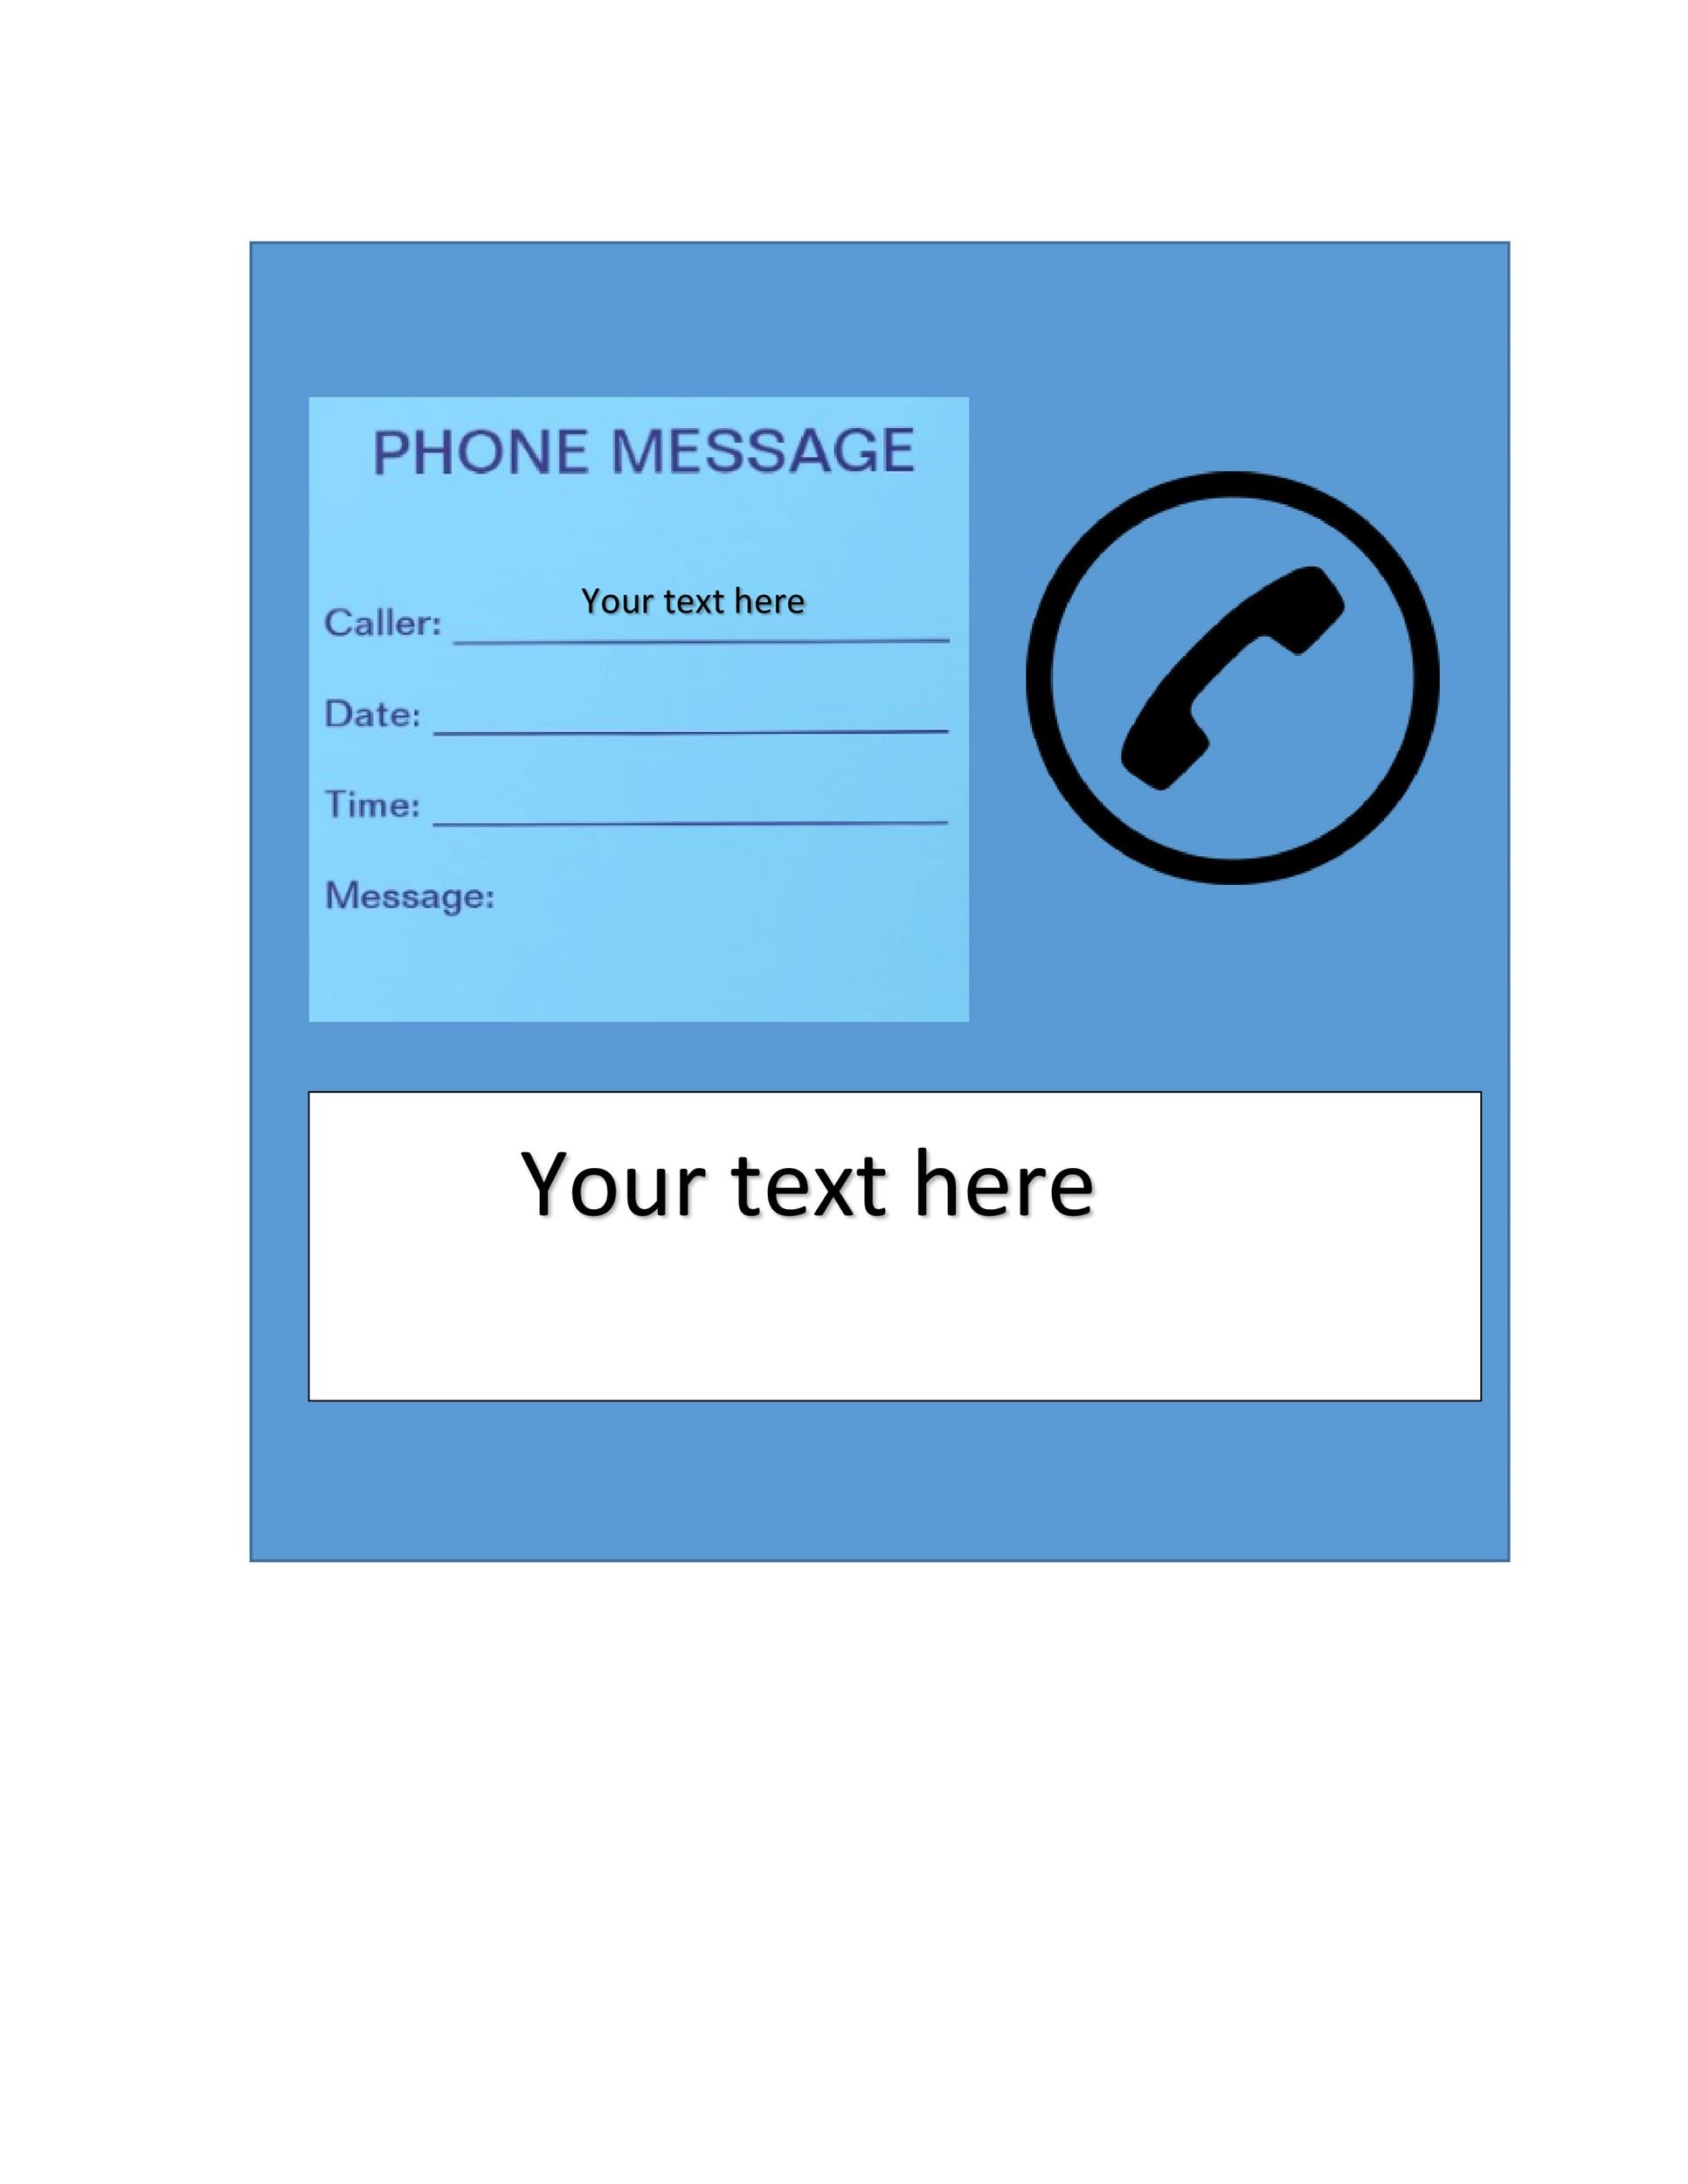 Free phone message template 35